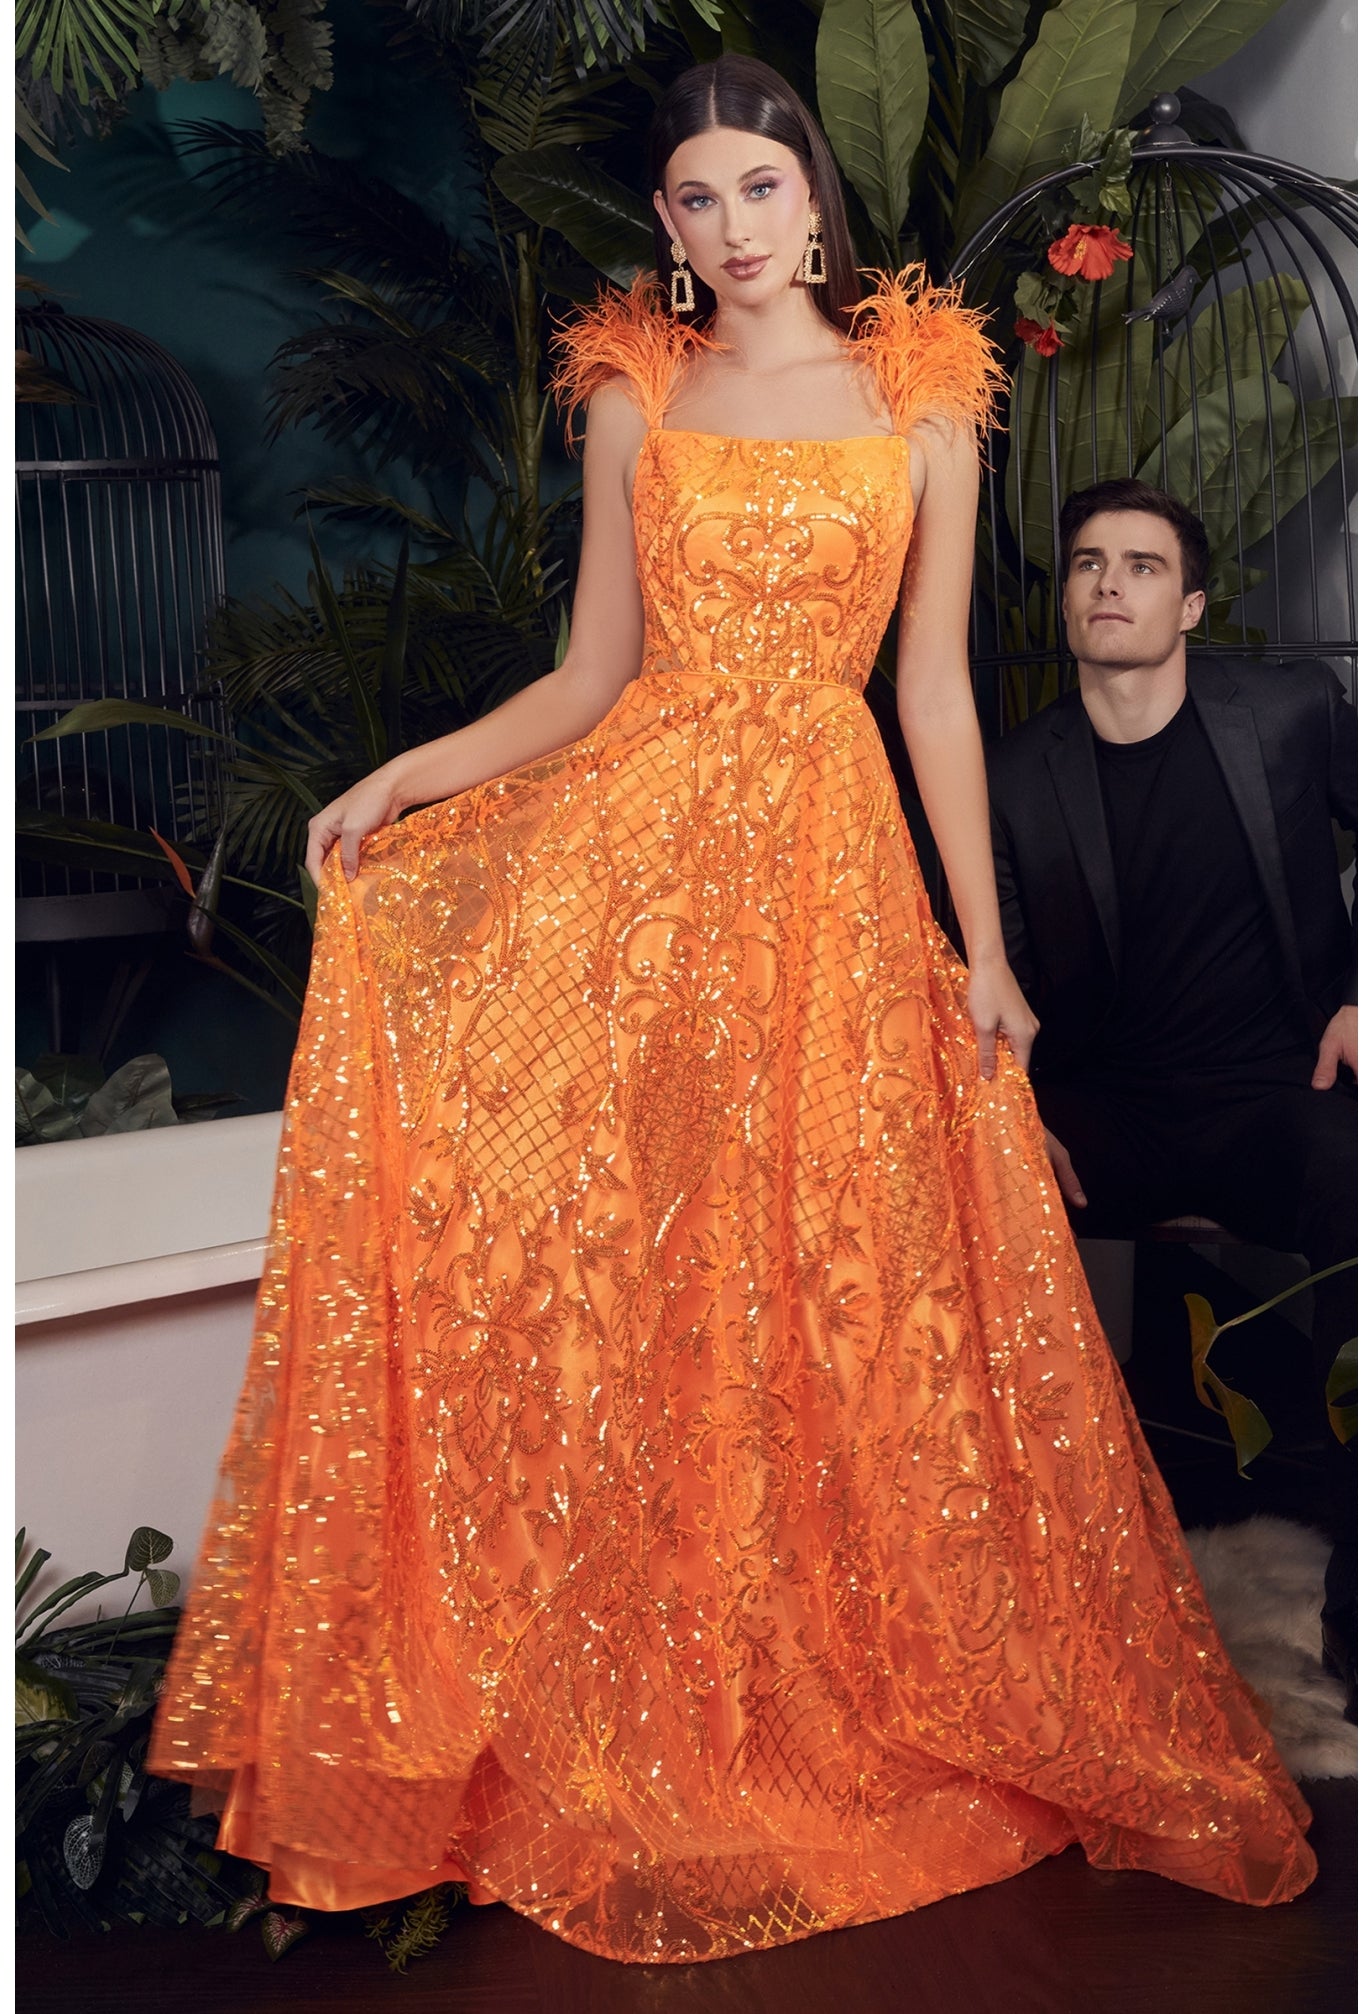 Ladivine KV1076 Size 2 Neon Orange Sequin Feather Prom Dress A Line Sheer Backless Formal Gown